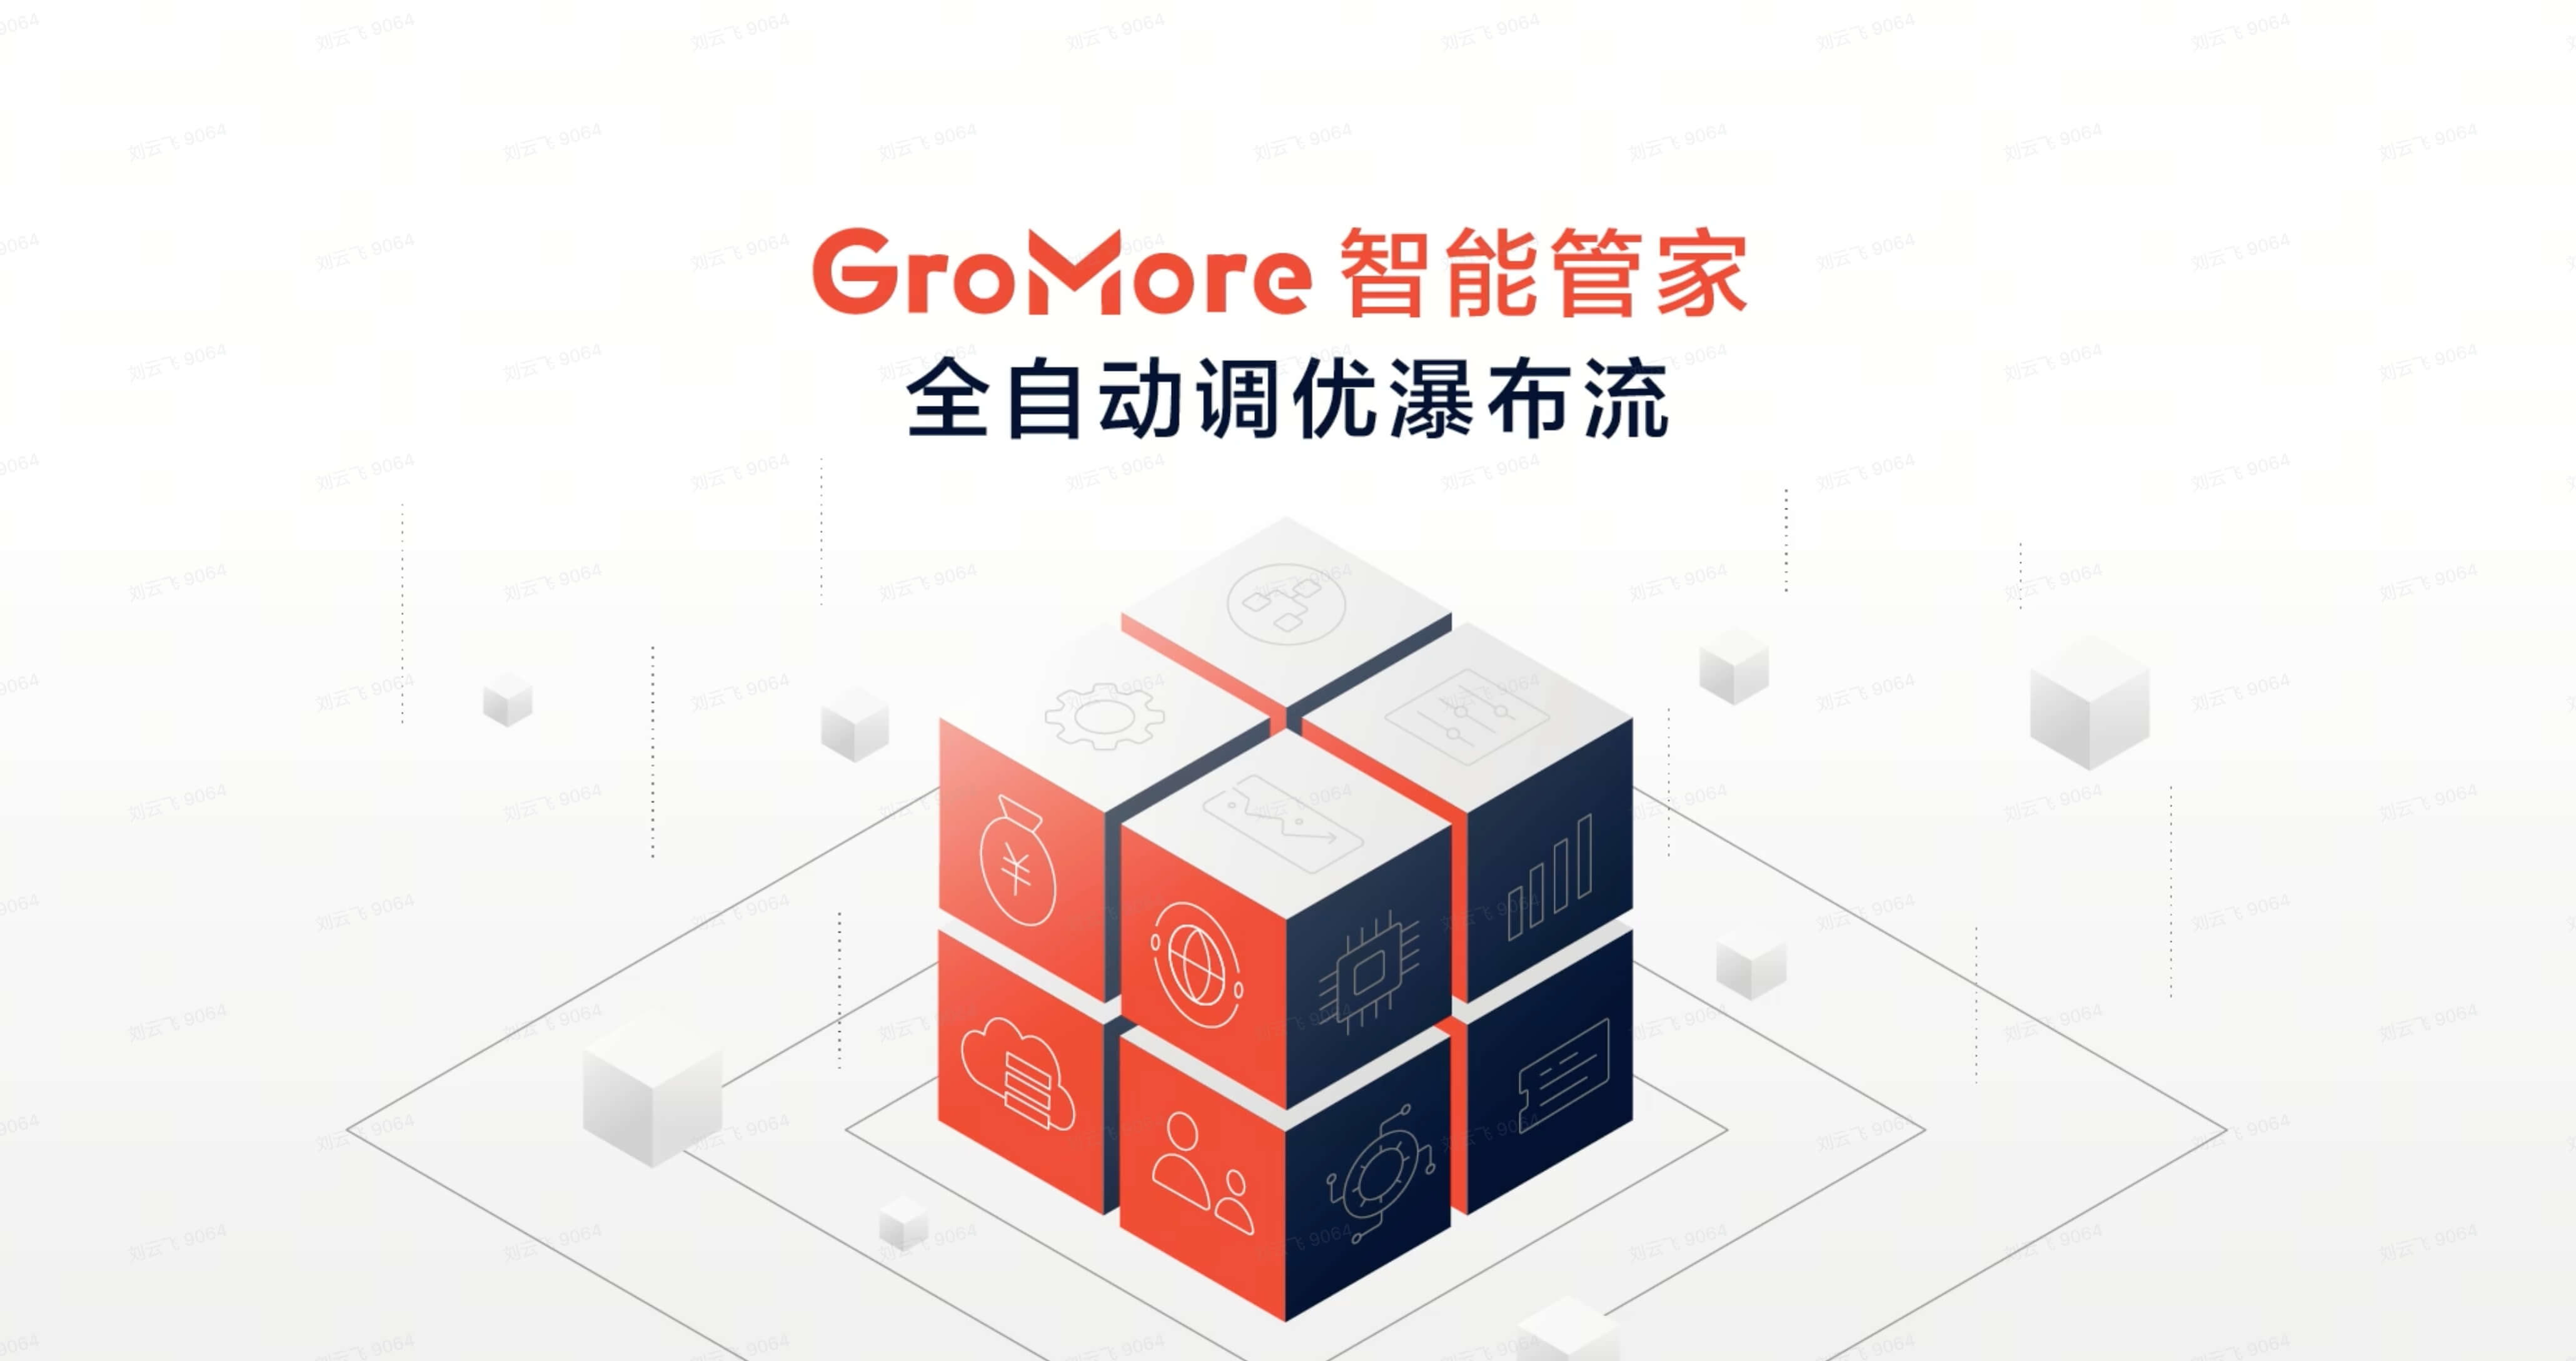 GroMore: improve your app traffic monetization efficiency and revenue